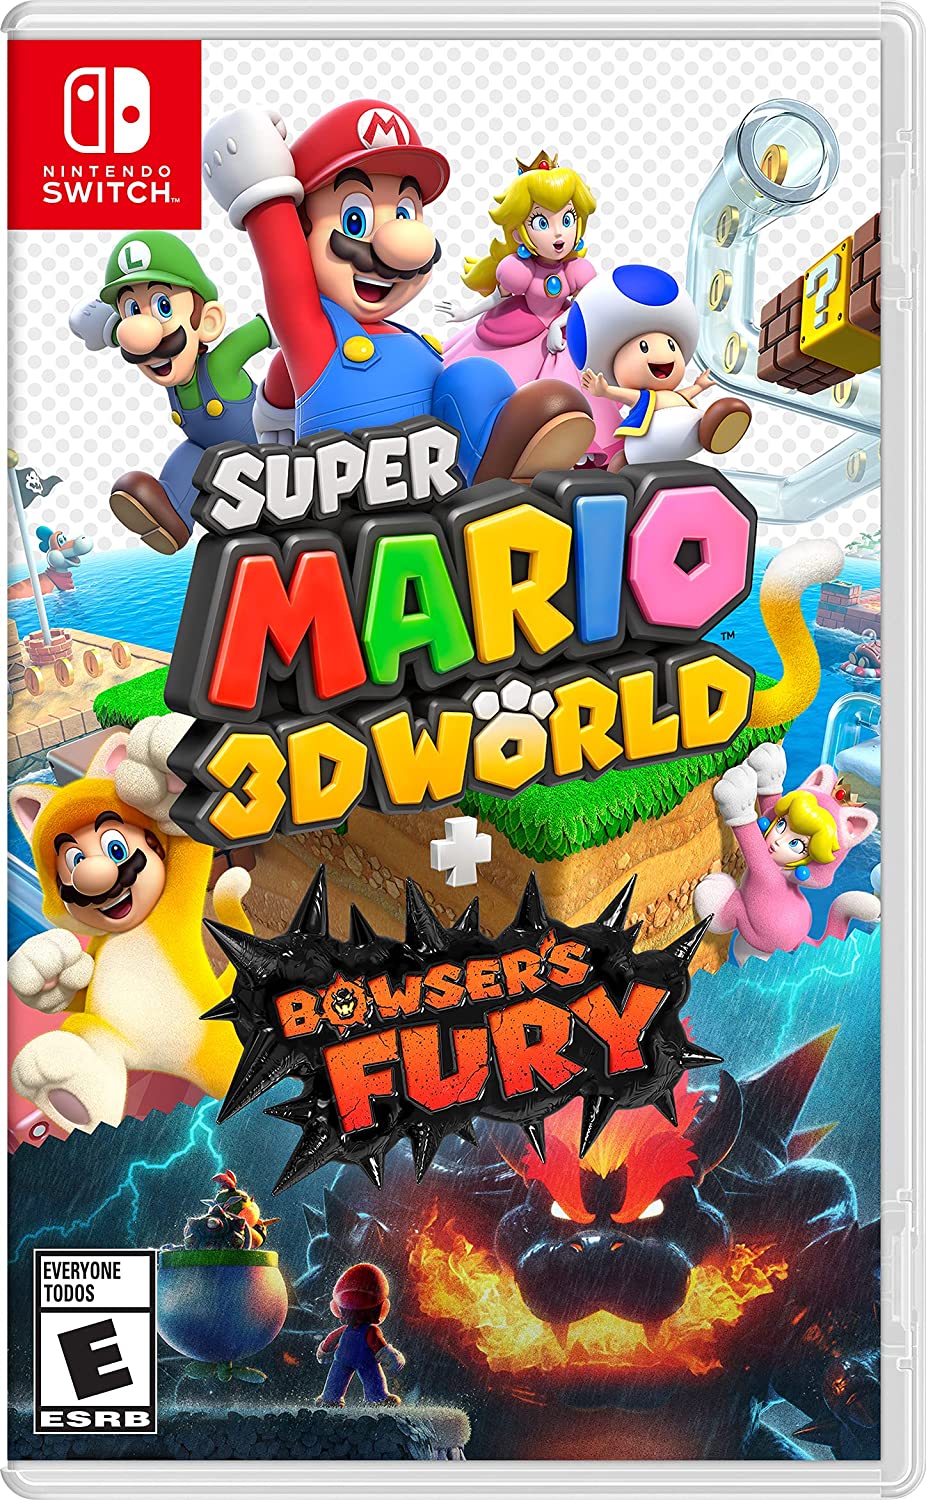 Super Mario World 3D + Bowser's Fury for Nintendo Switch cover art.